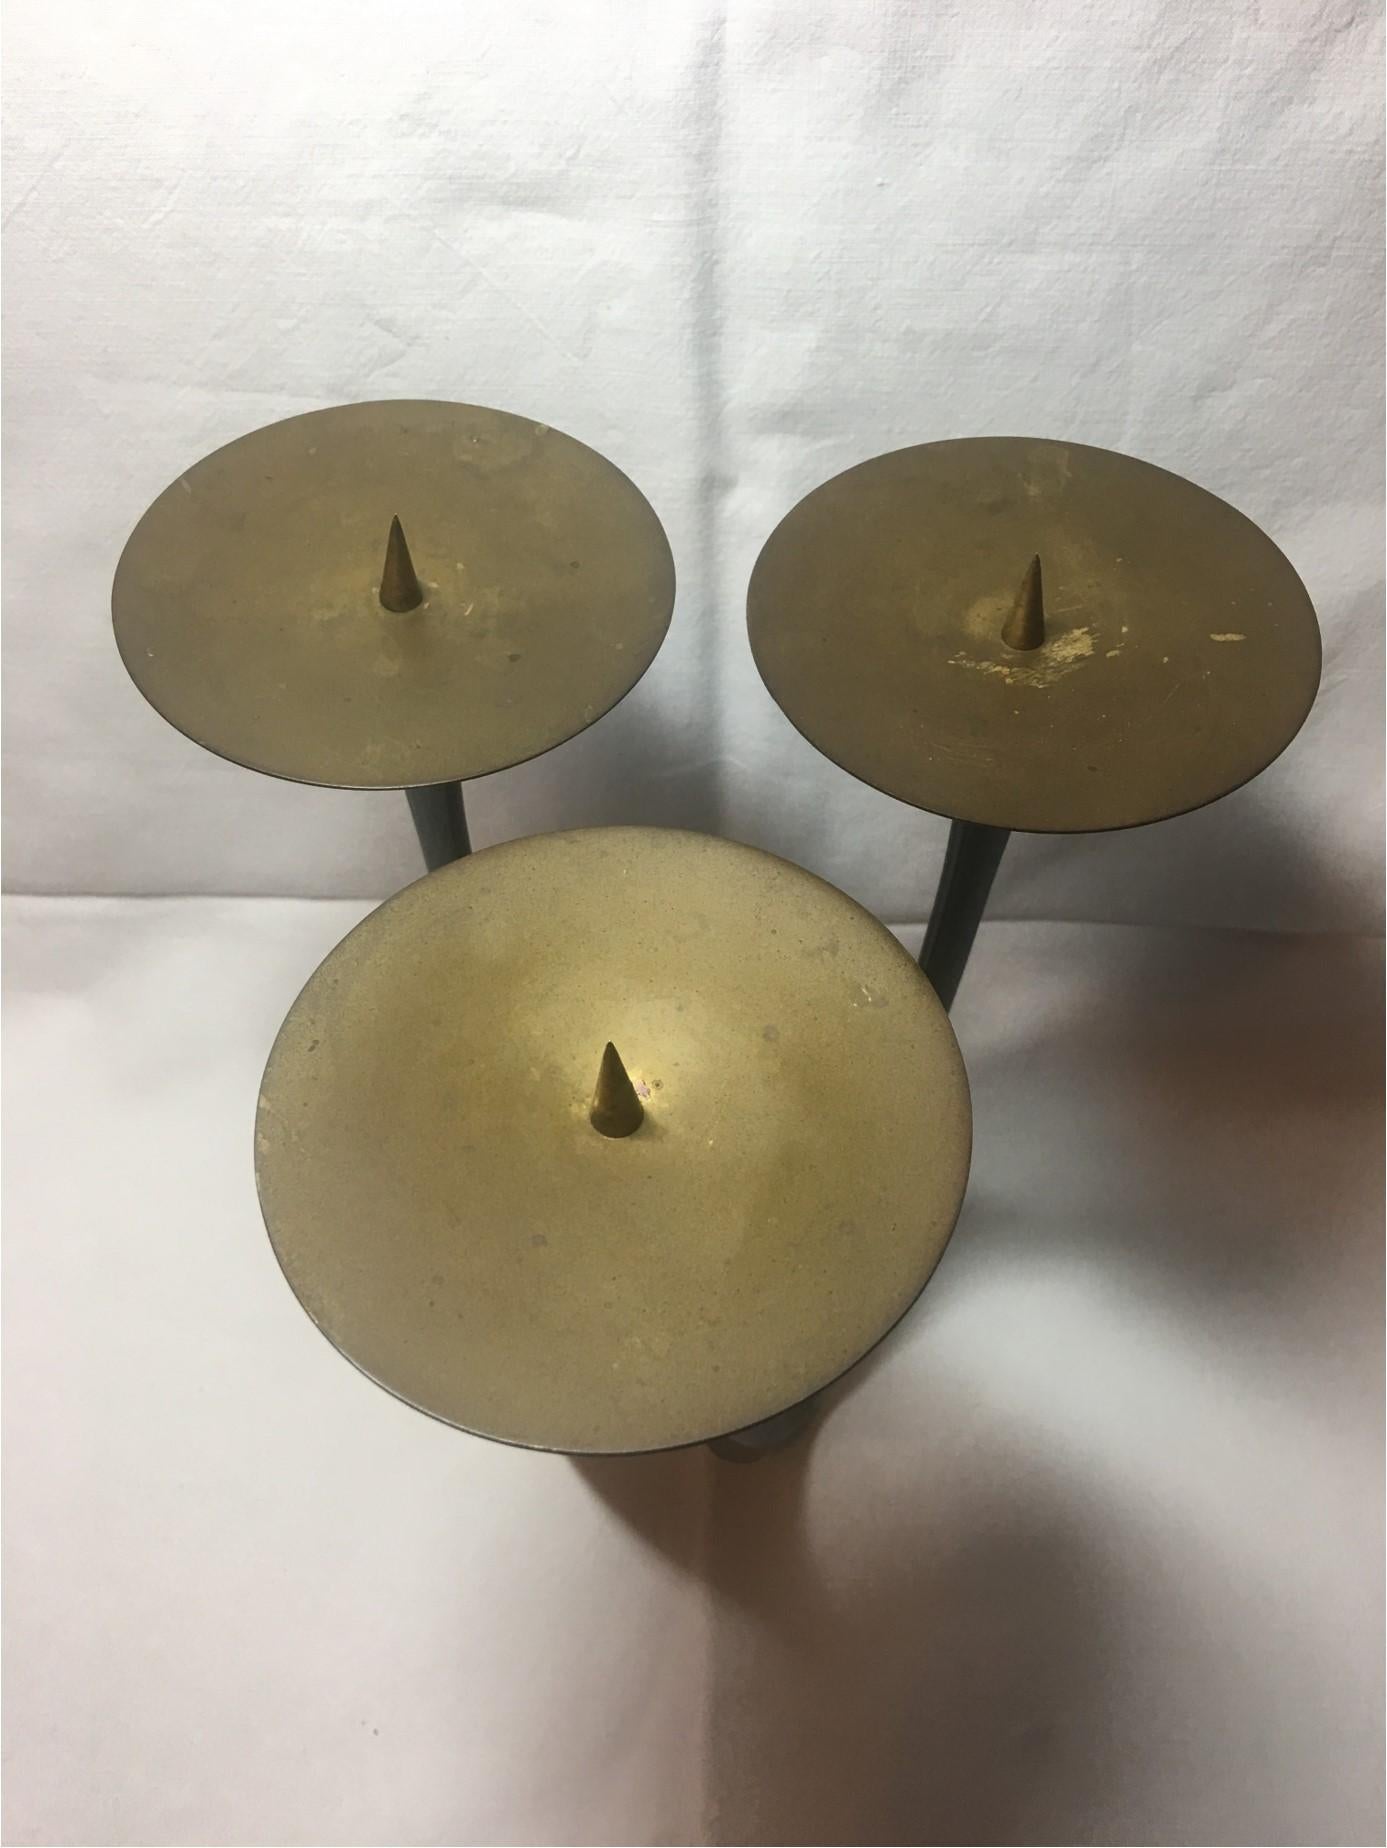 A 1950s era black and brass candleholder designed by Klaus Ullrich for Faber & Schumacher. A beautiful natural Patina has formed over the decades. The candle drip holders radius is 4 inches.
A lovely piece for any room.